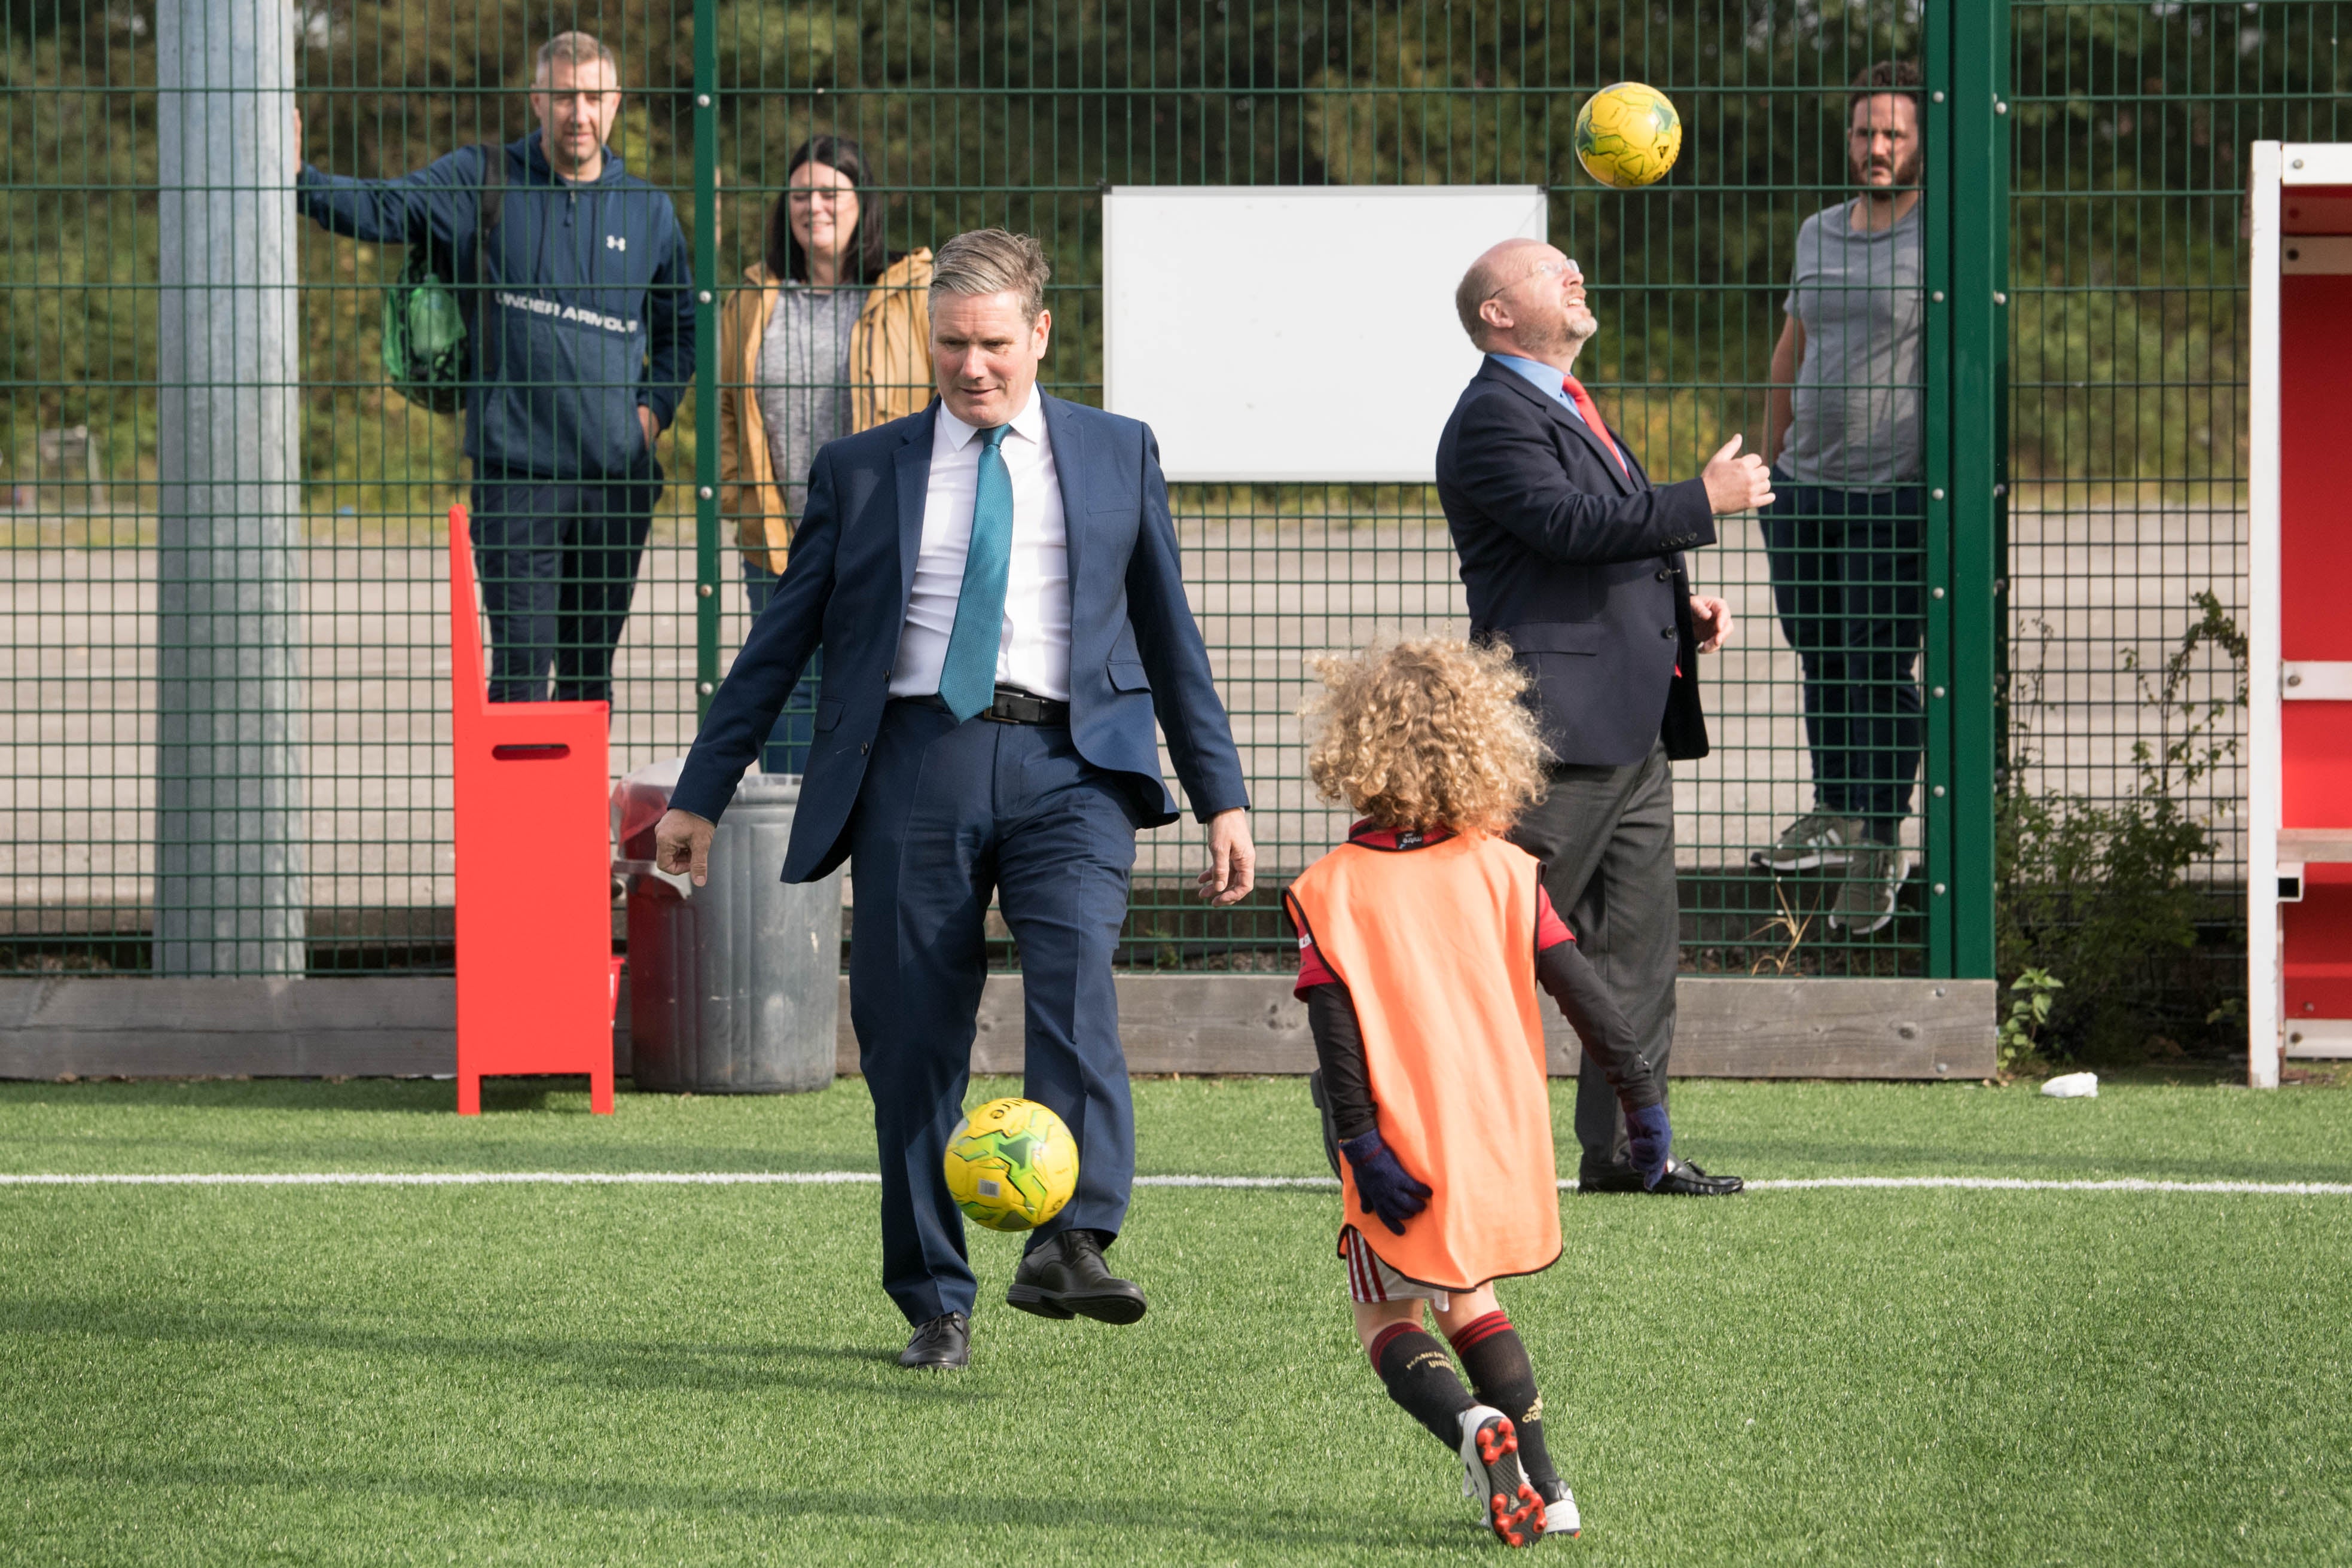 Sir Keir Starmer (left) with MP Liam Byrne, playing football during a visit to Walsall football club